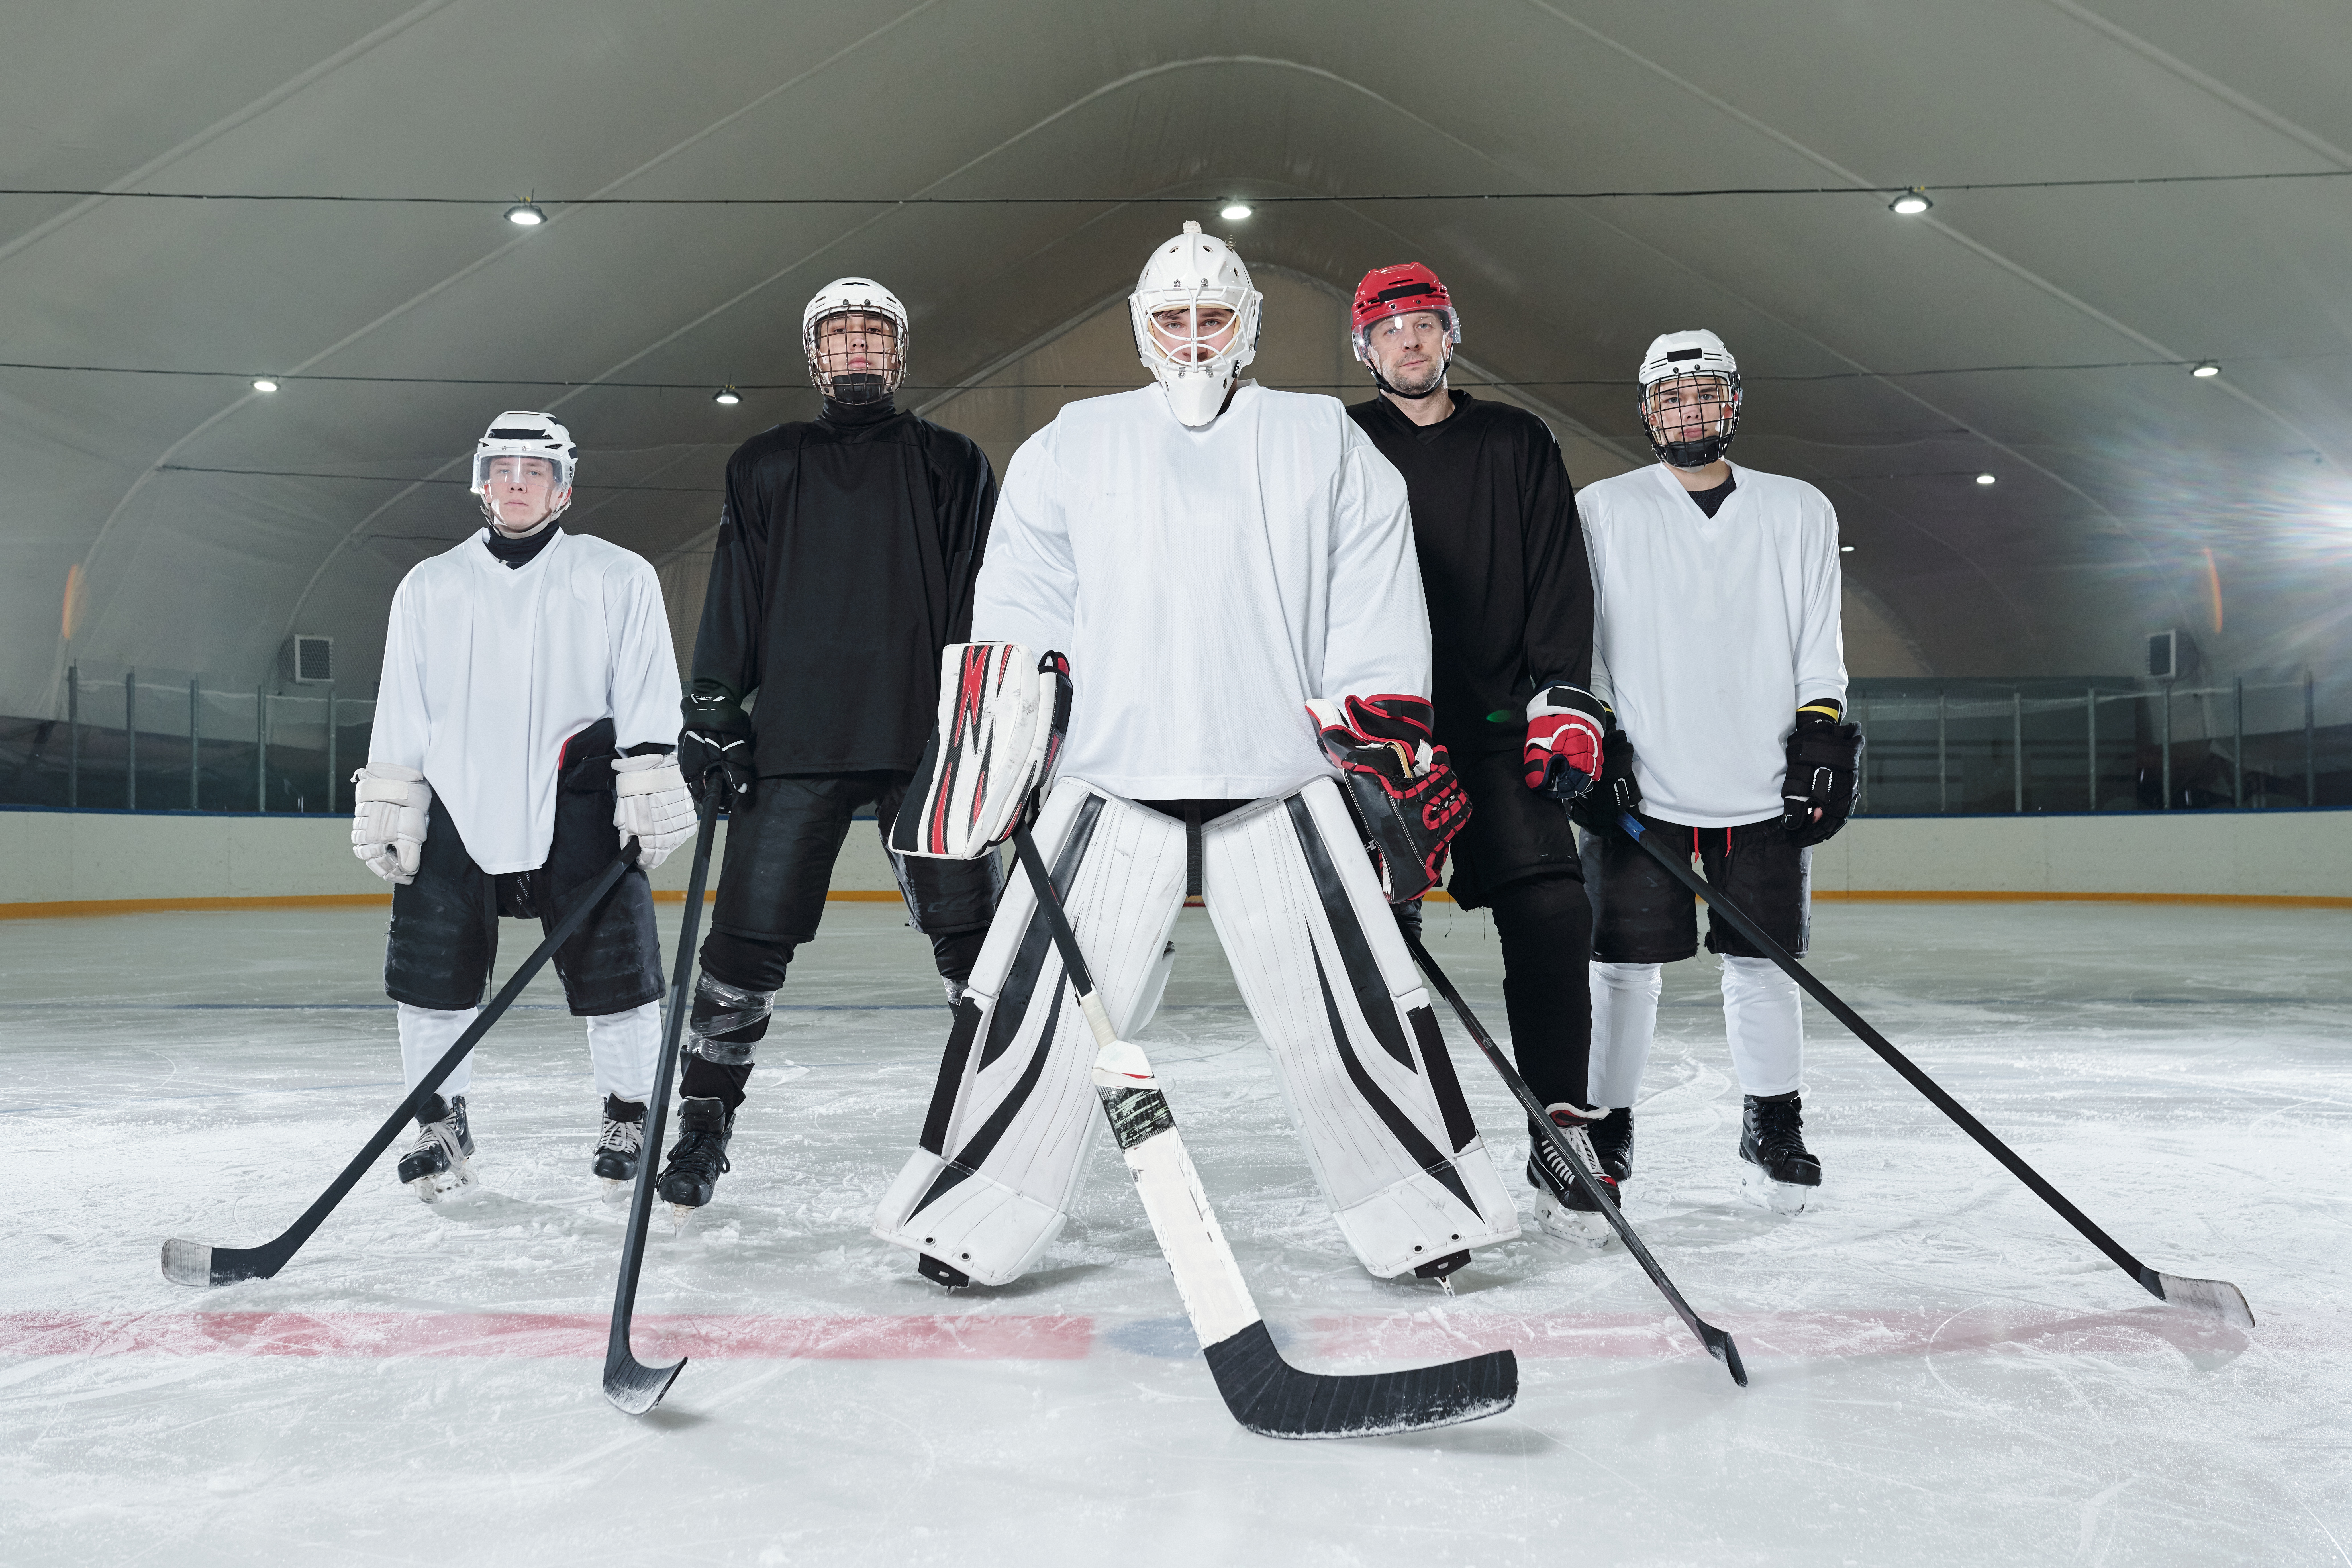 Professional hockey players and their trainer in sports uniform and skates